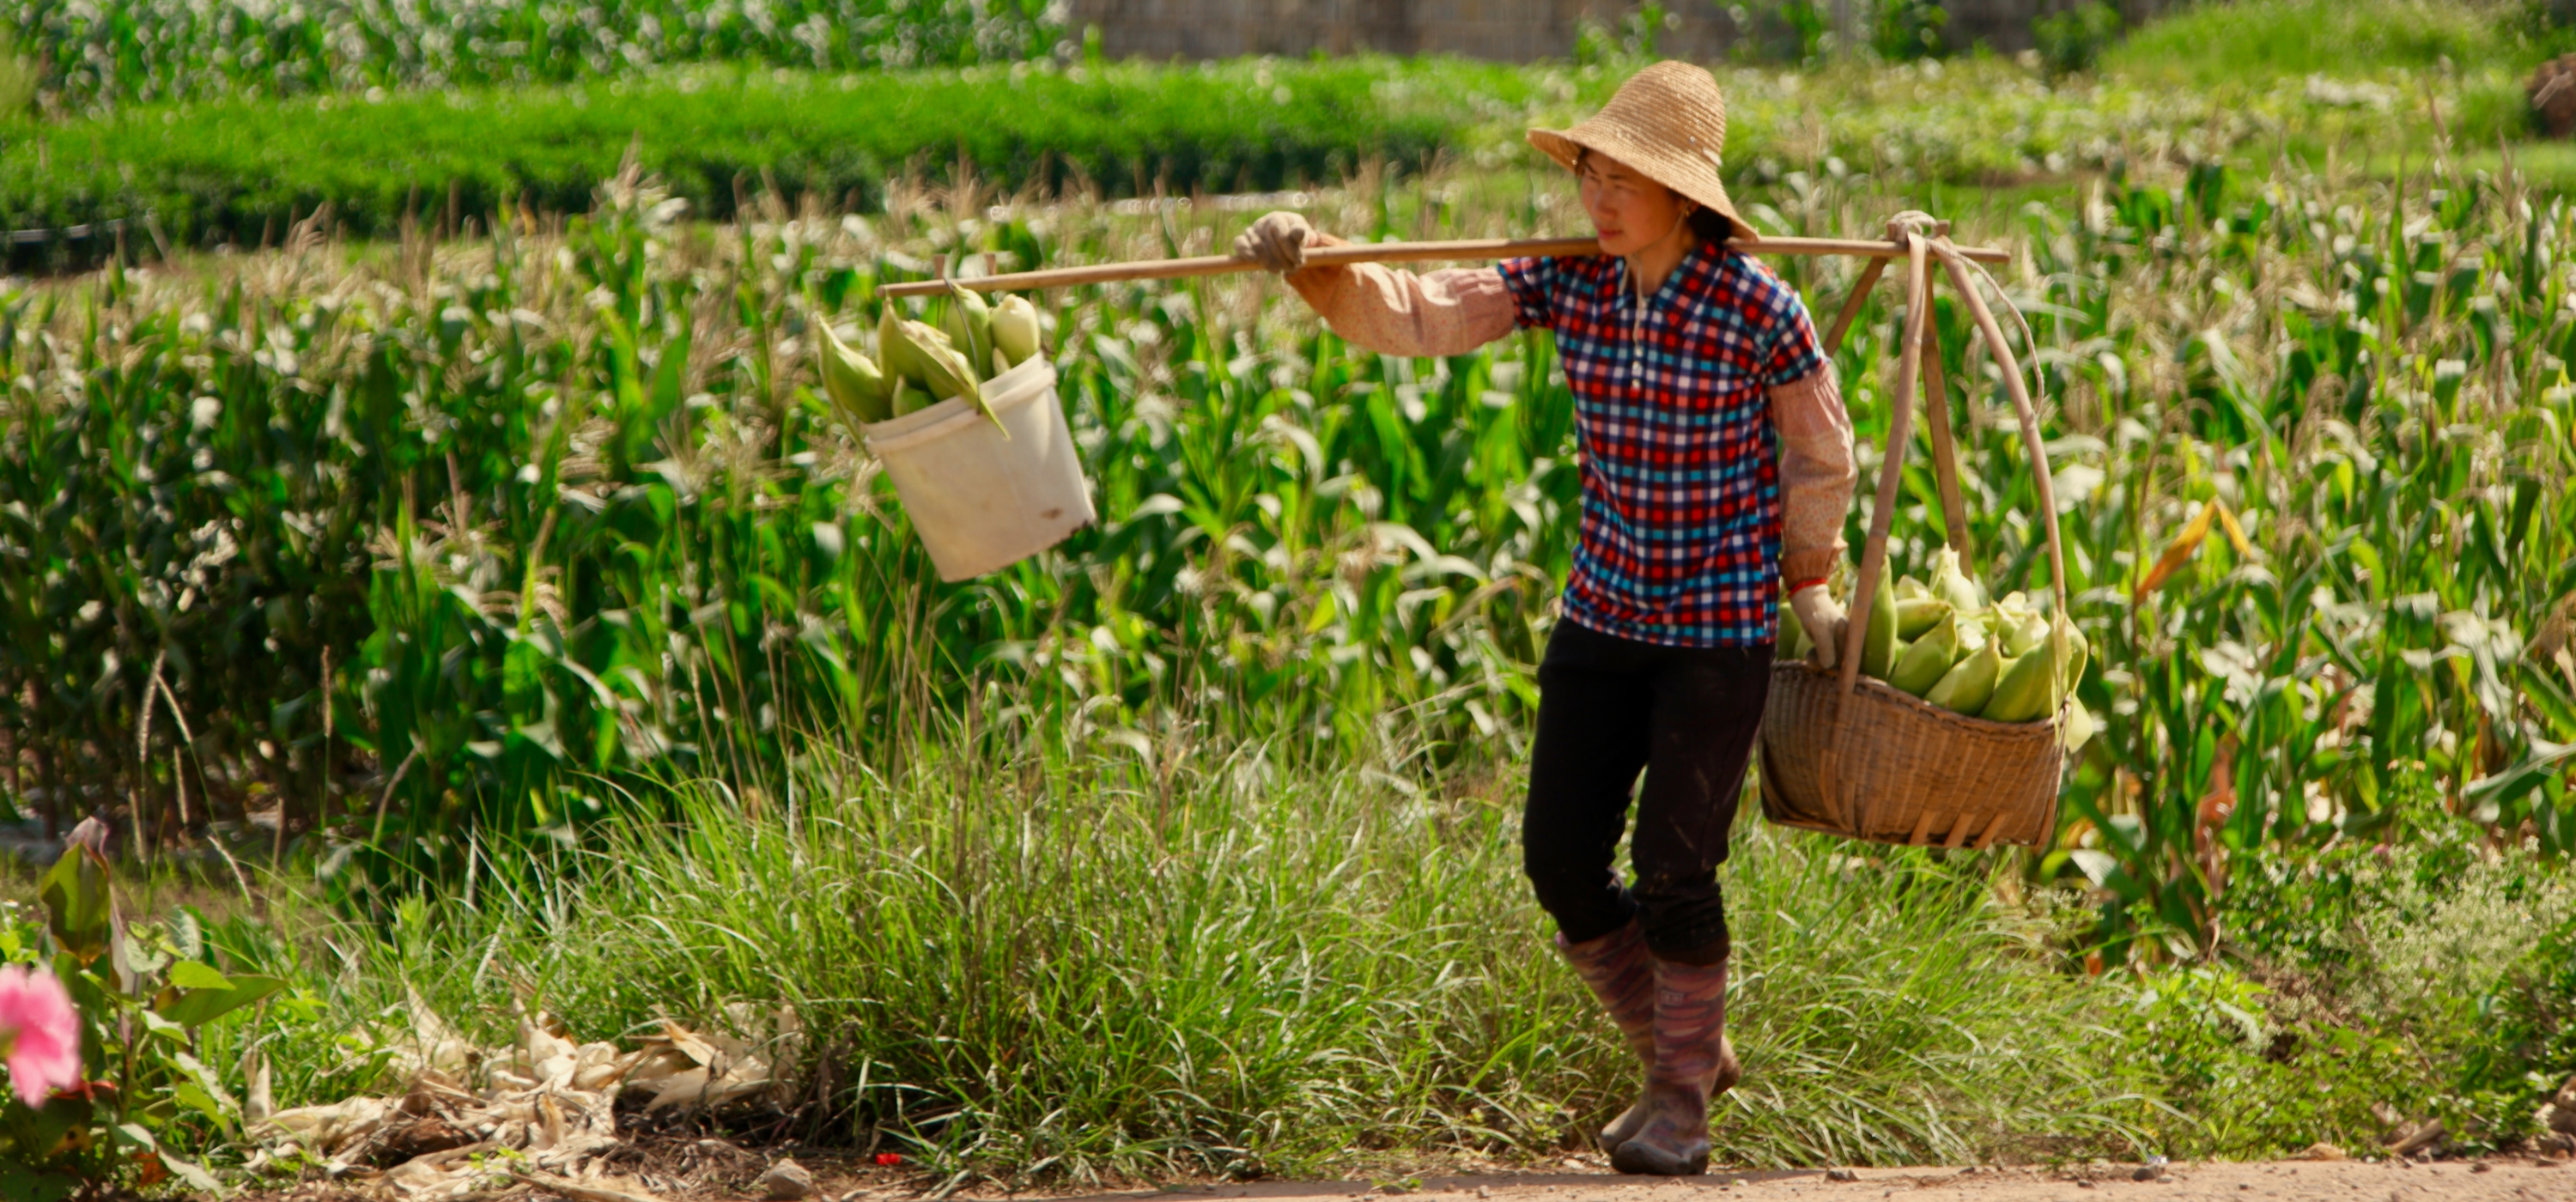 Chinese woman wearing brown wicker hat walking near corn. Harvesting corn, agriculture, working